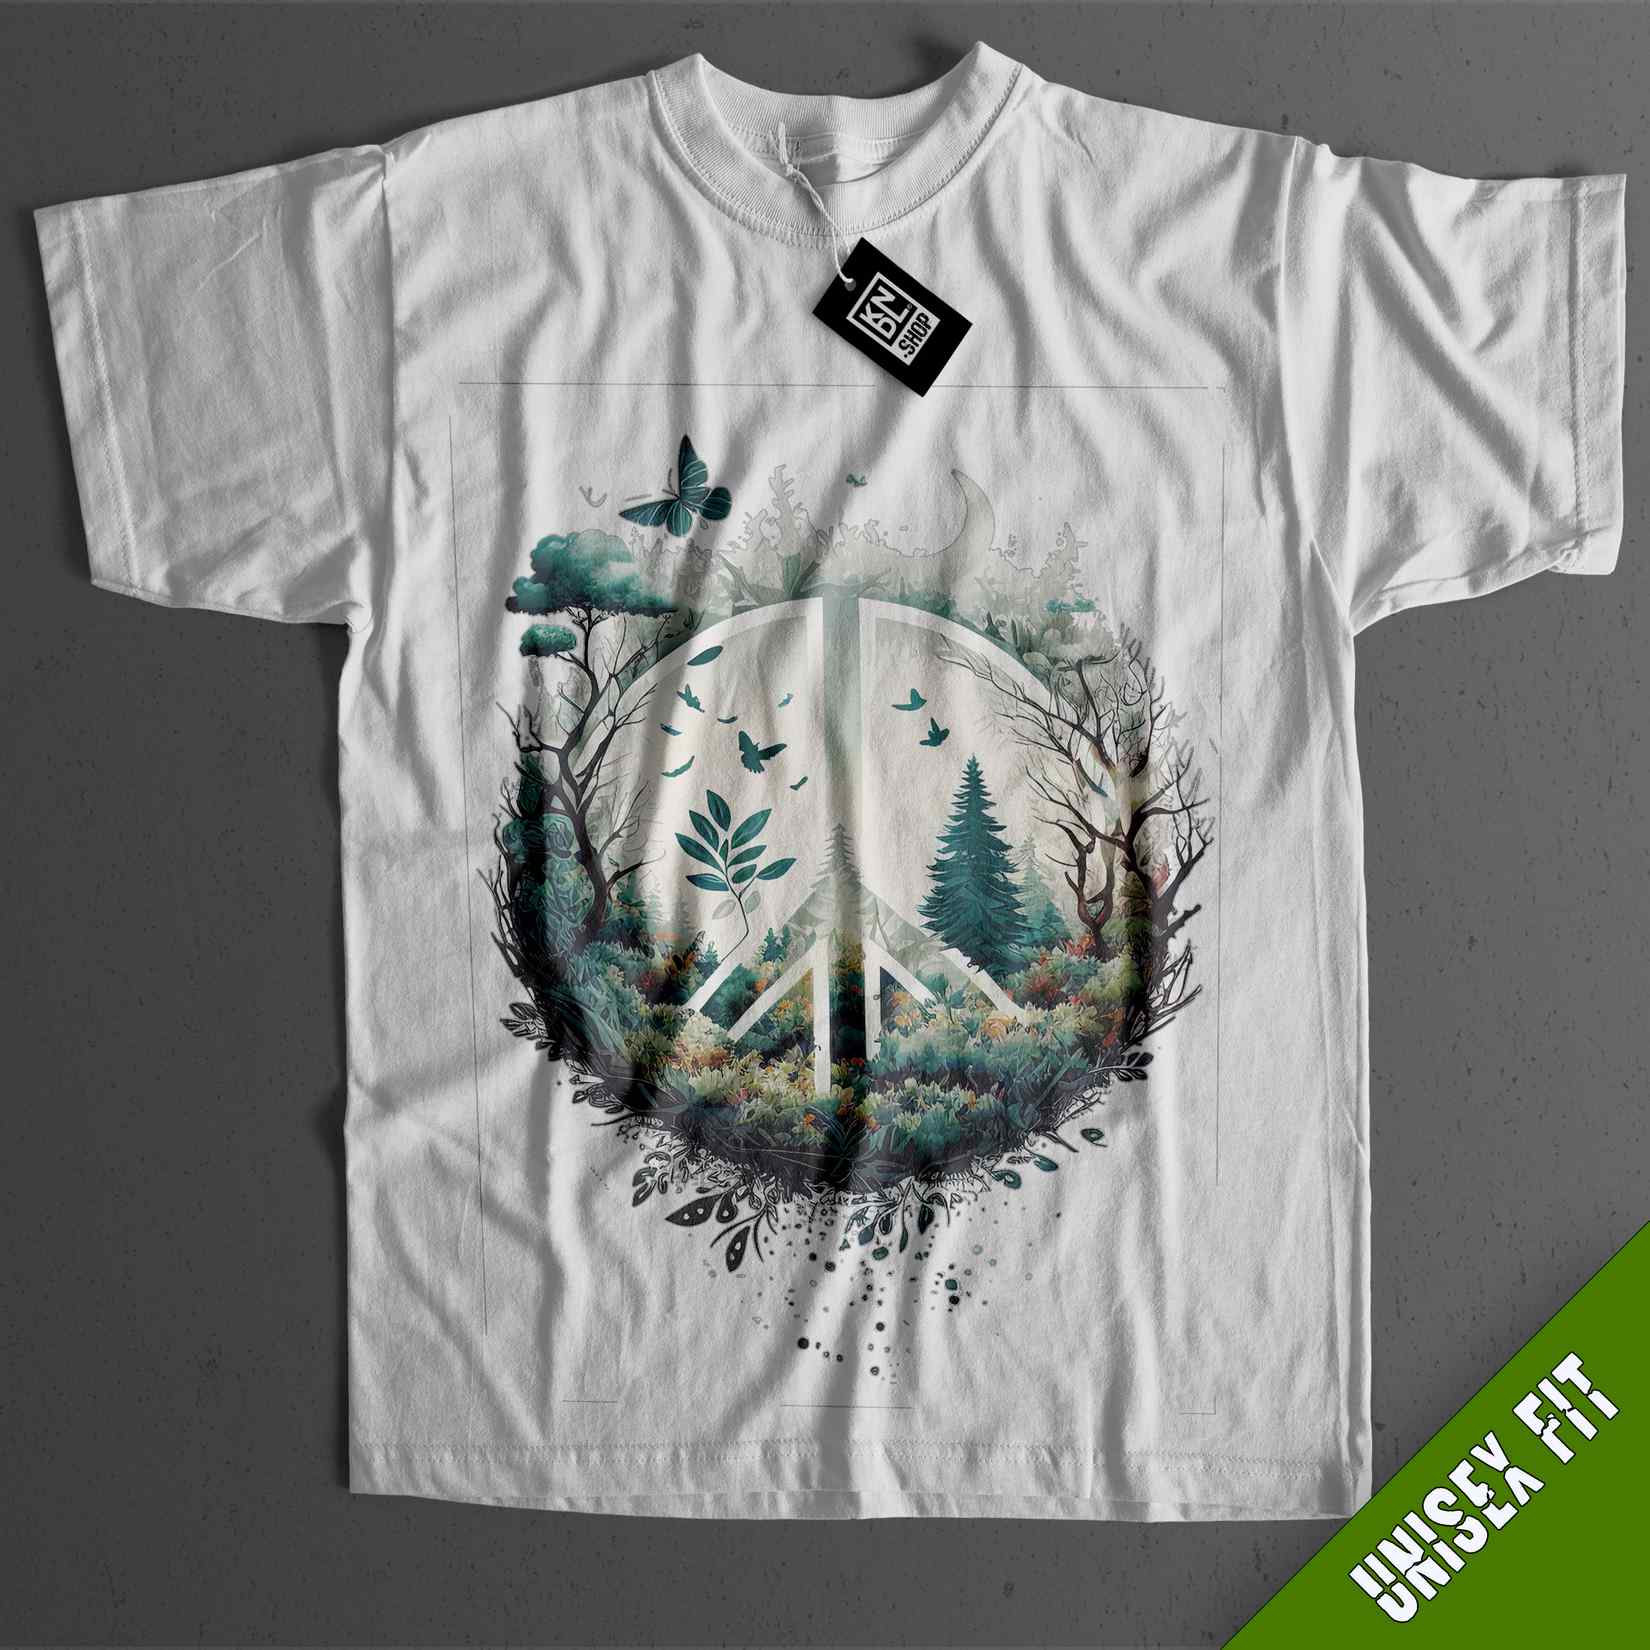 a white t - shirt with a forest scene on it